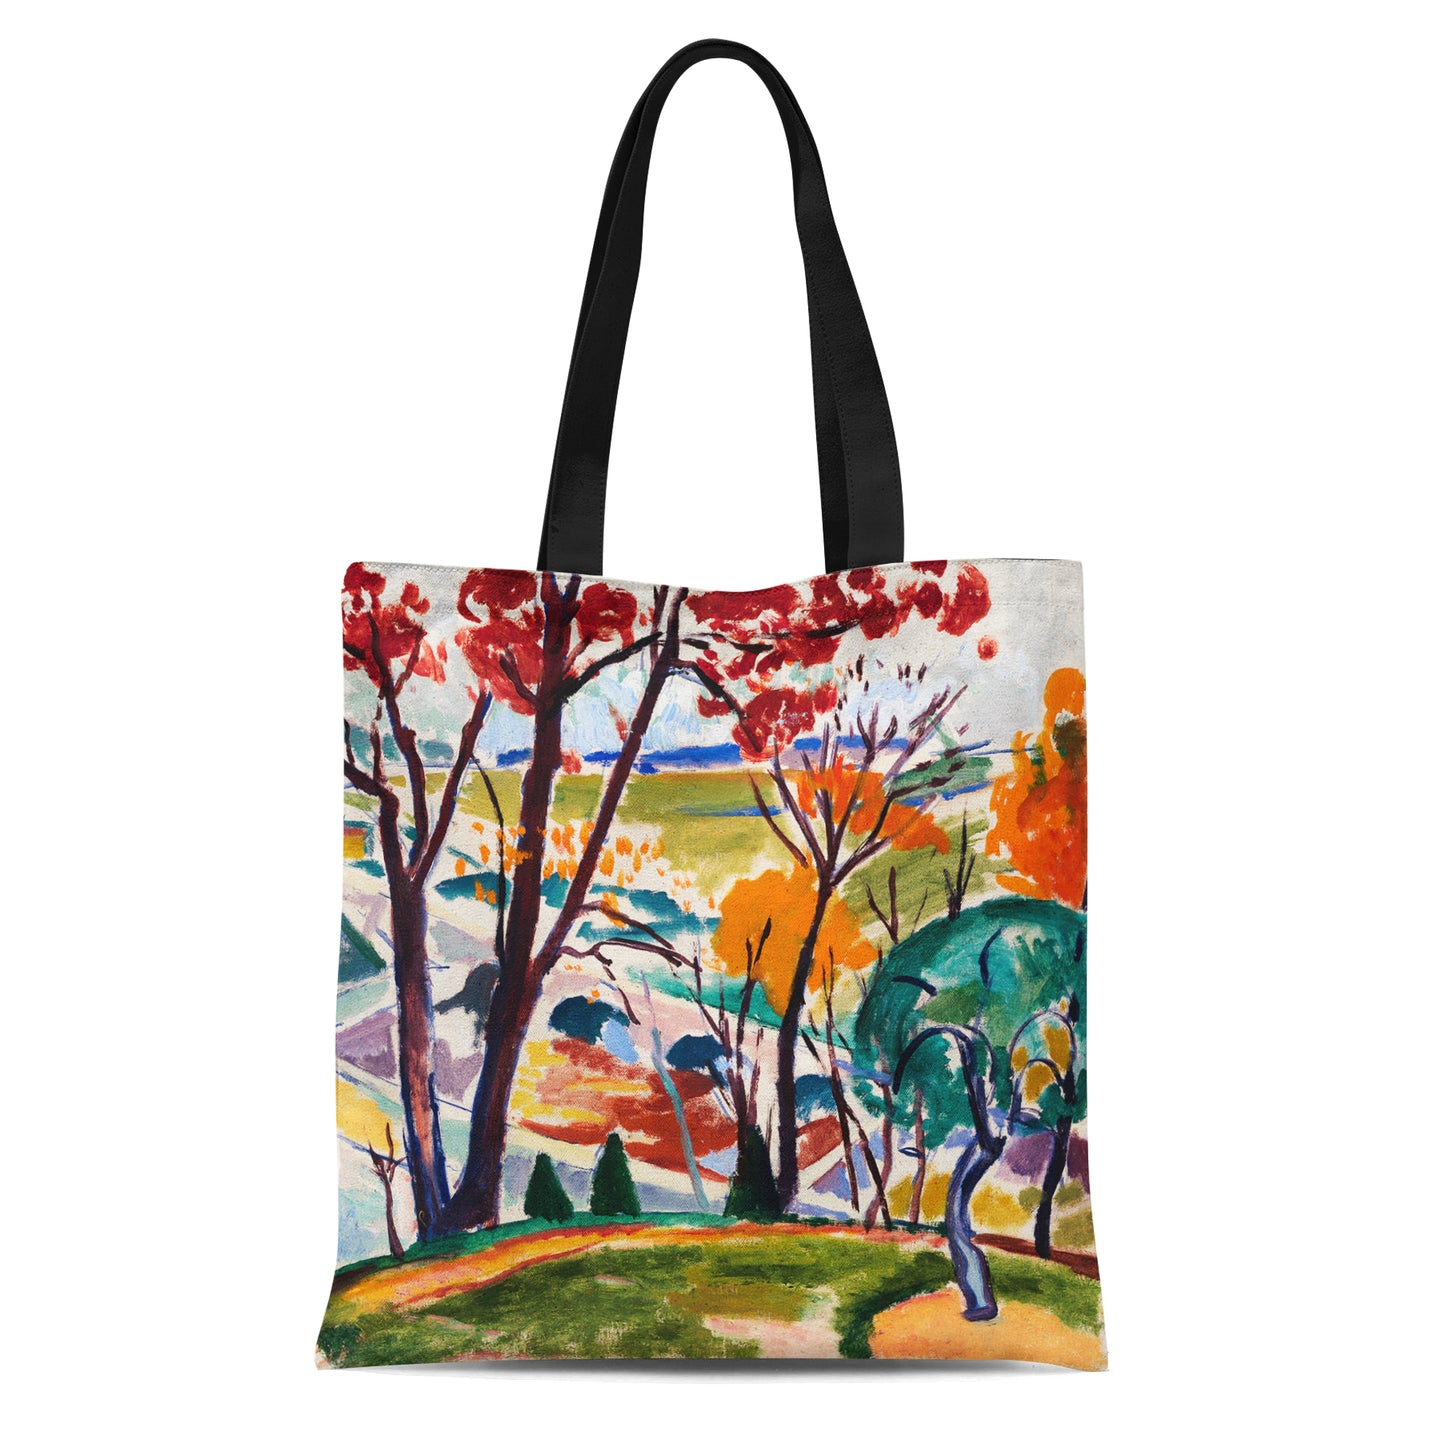 Custom Tote Bag with a painting